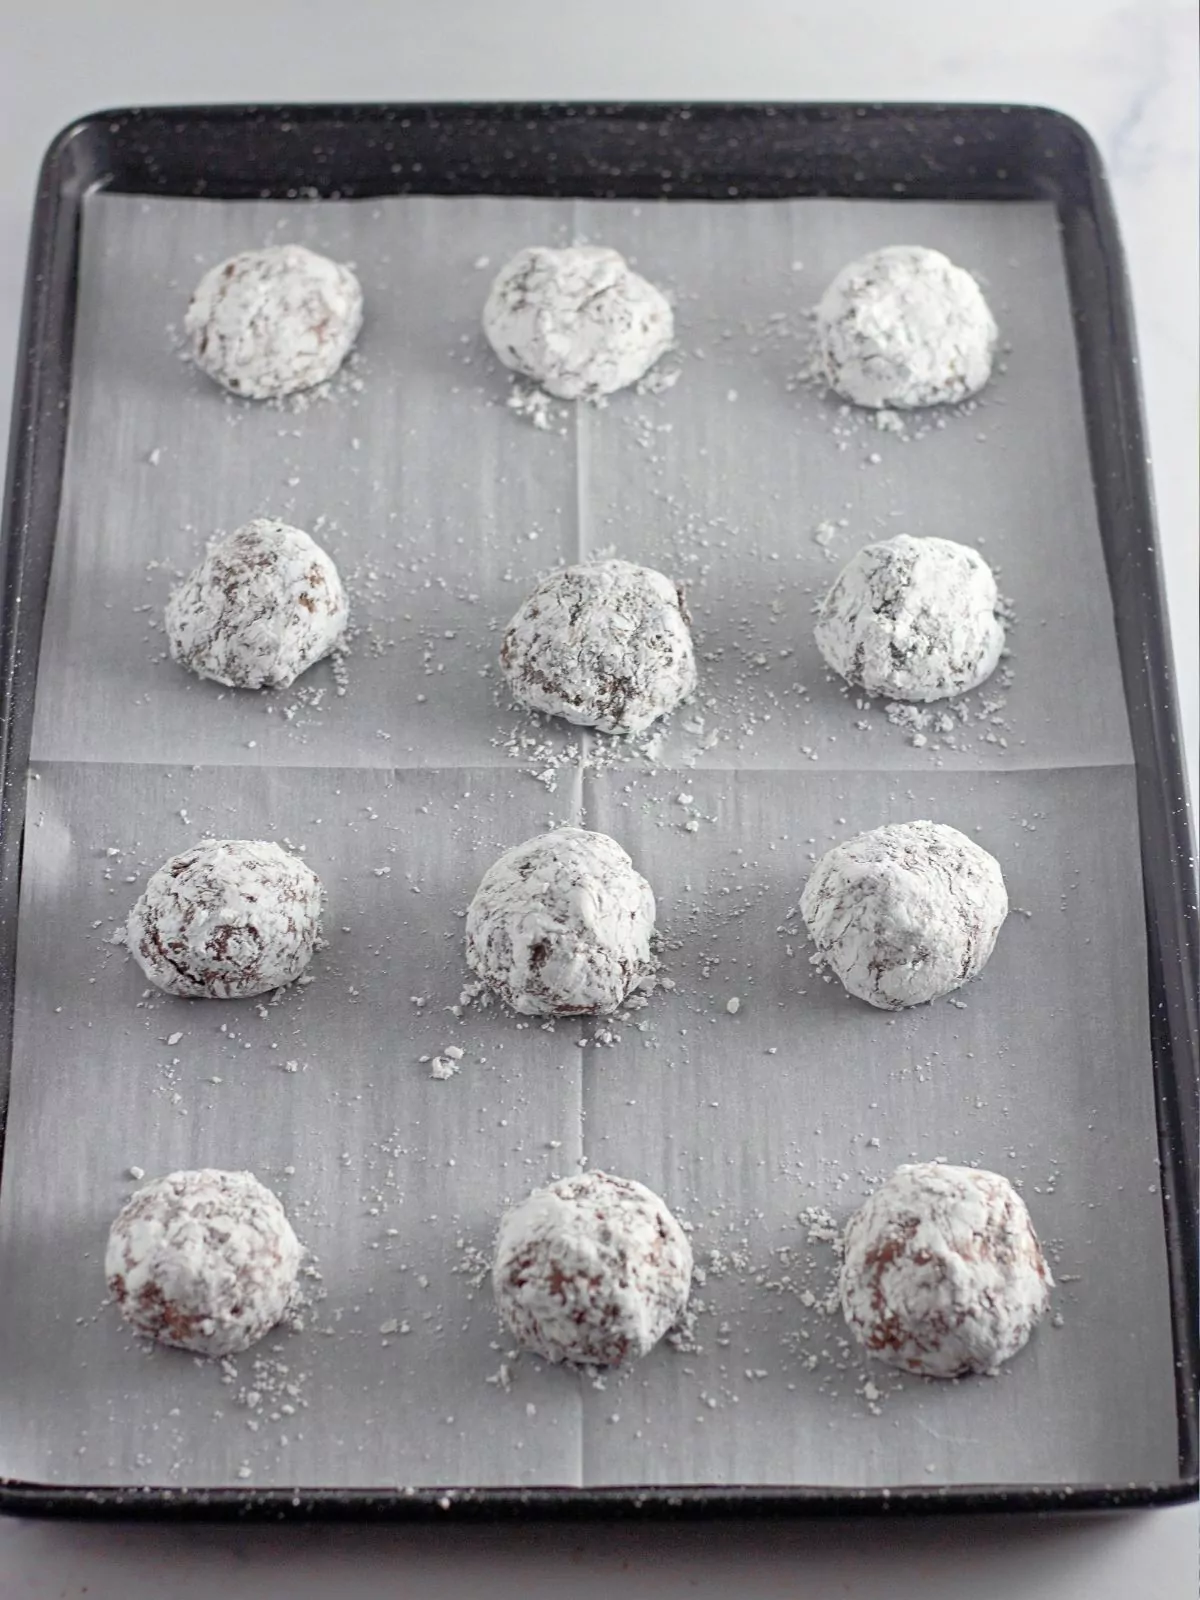 unbaked chocolate cake mix cookies.